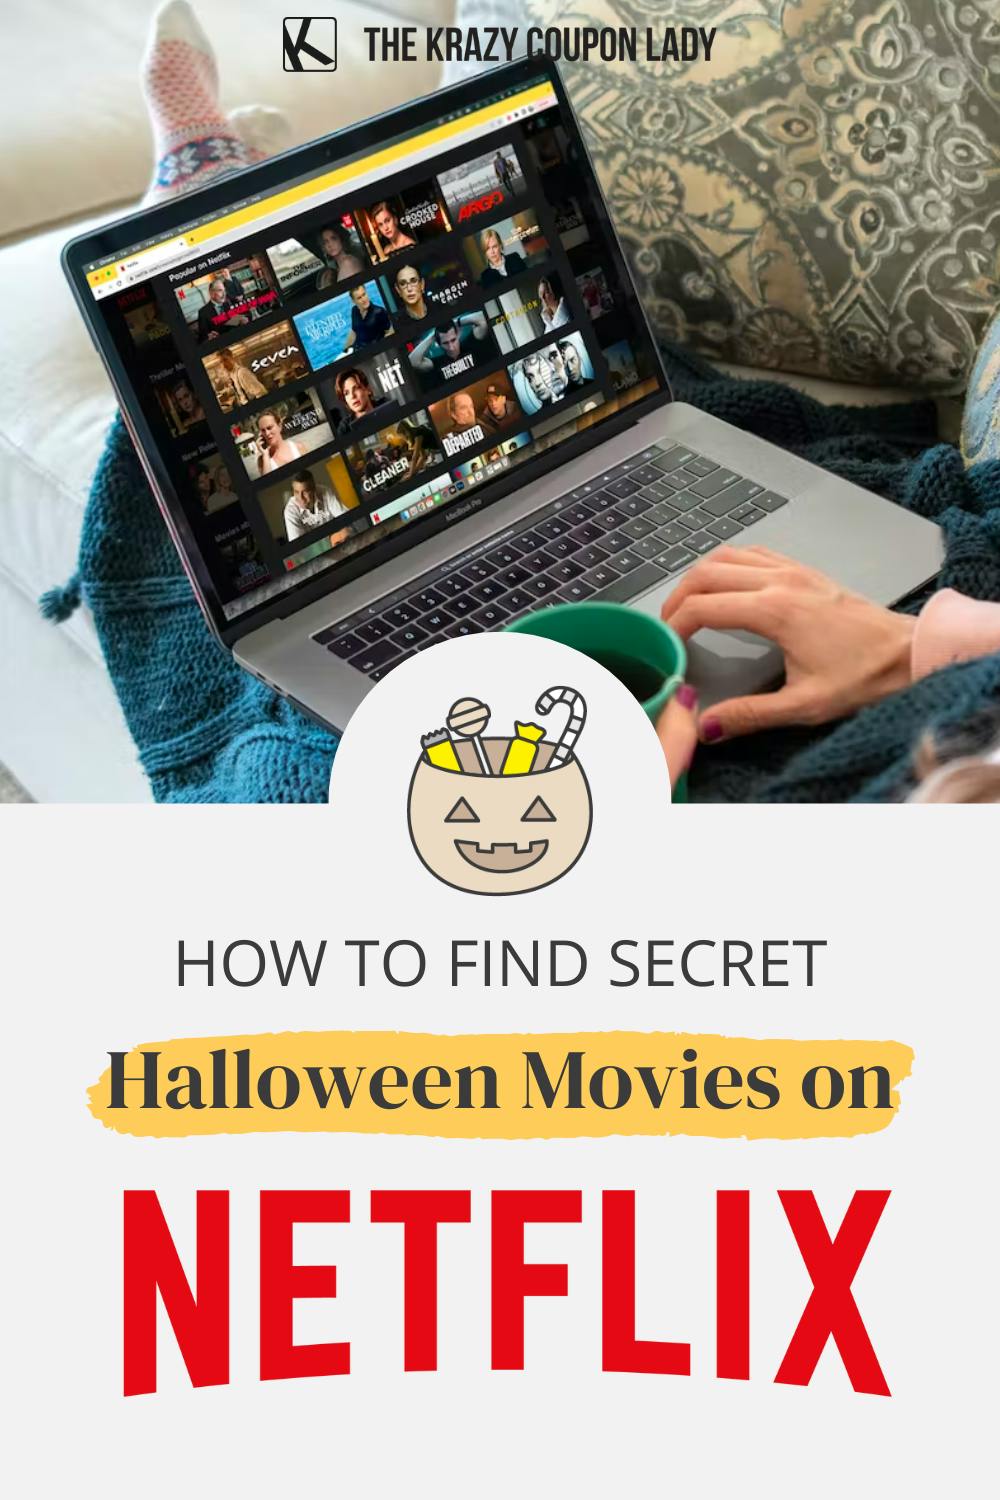 Here's How to Find Secret Halloween Movies on Netflix